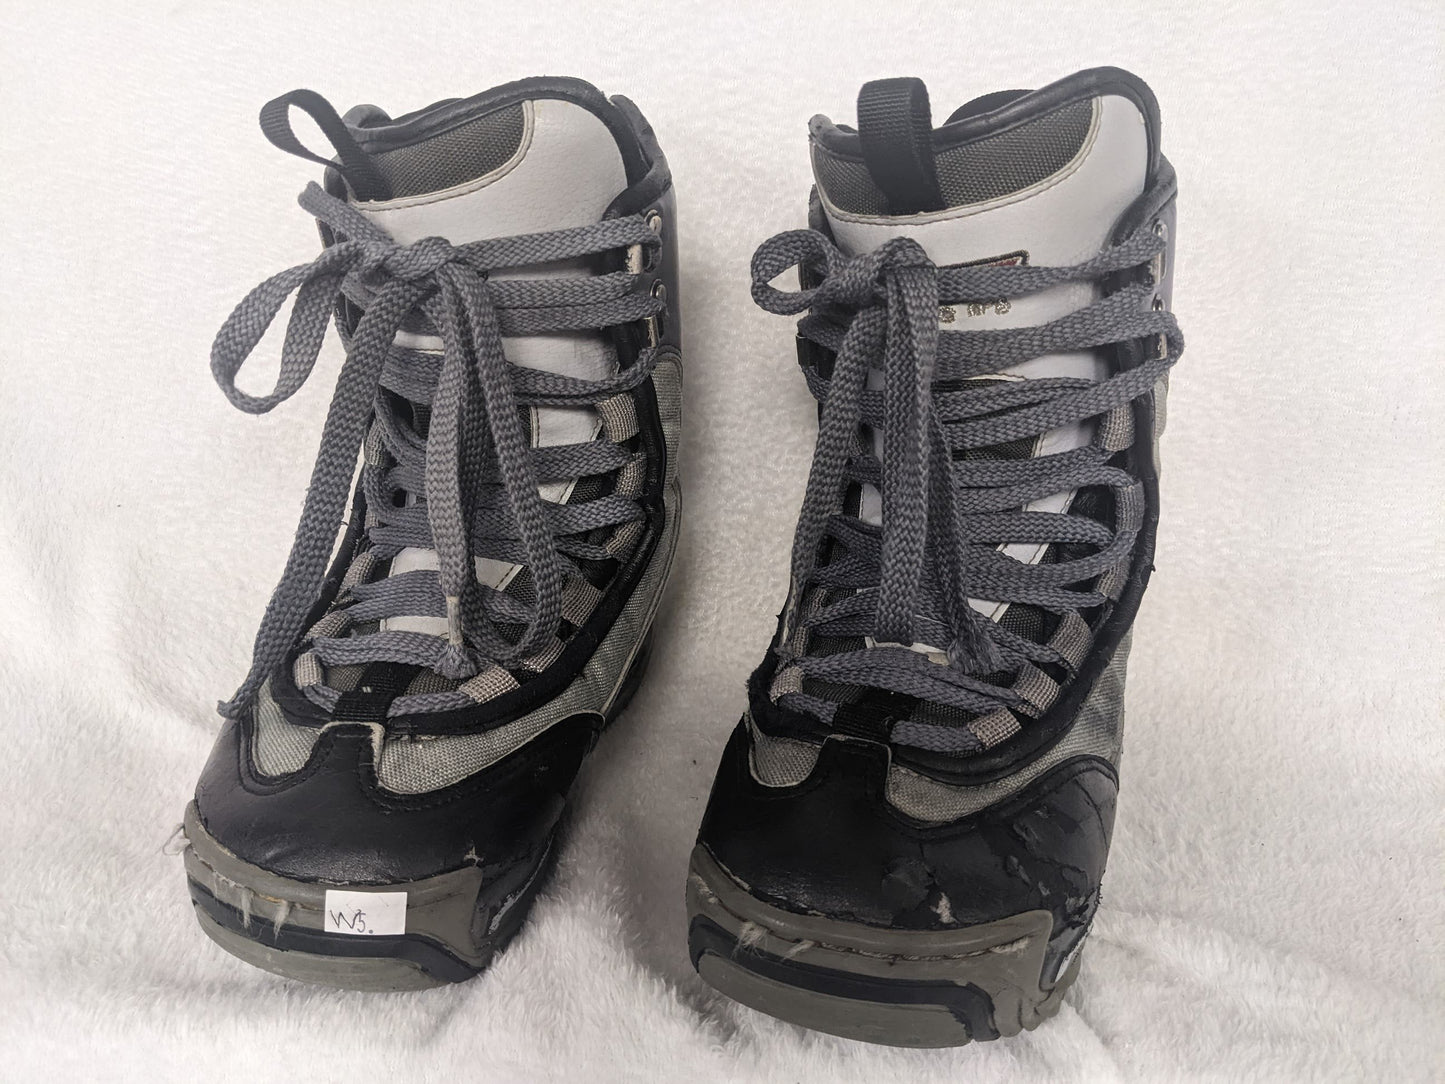 Vans Womens Snowboard Boots Size Womens 5 Color Gray Condition Used